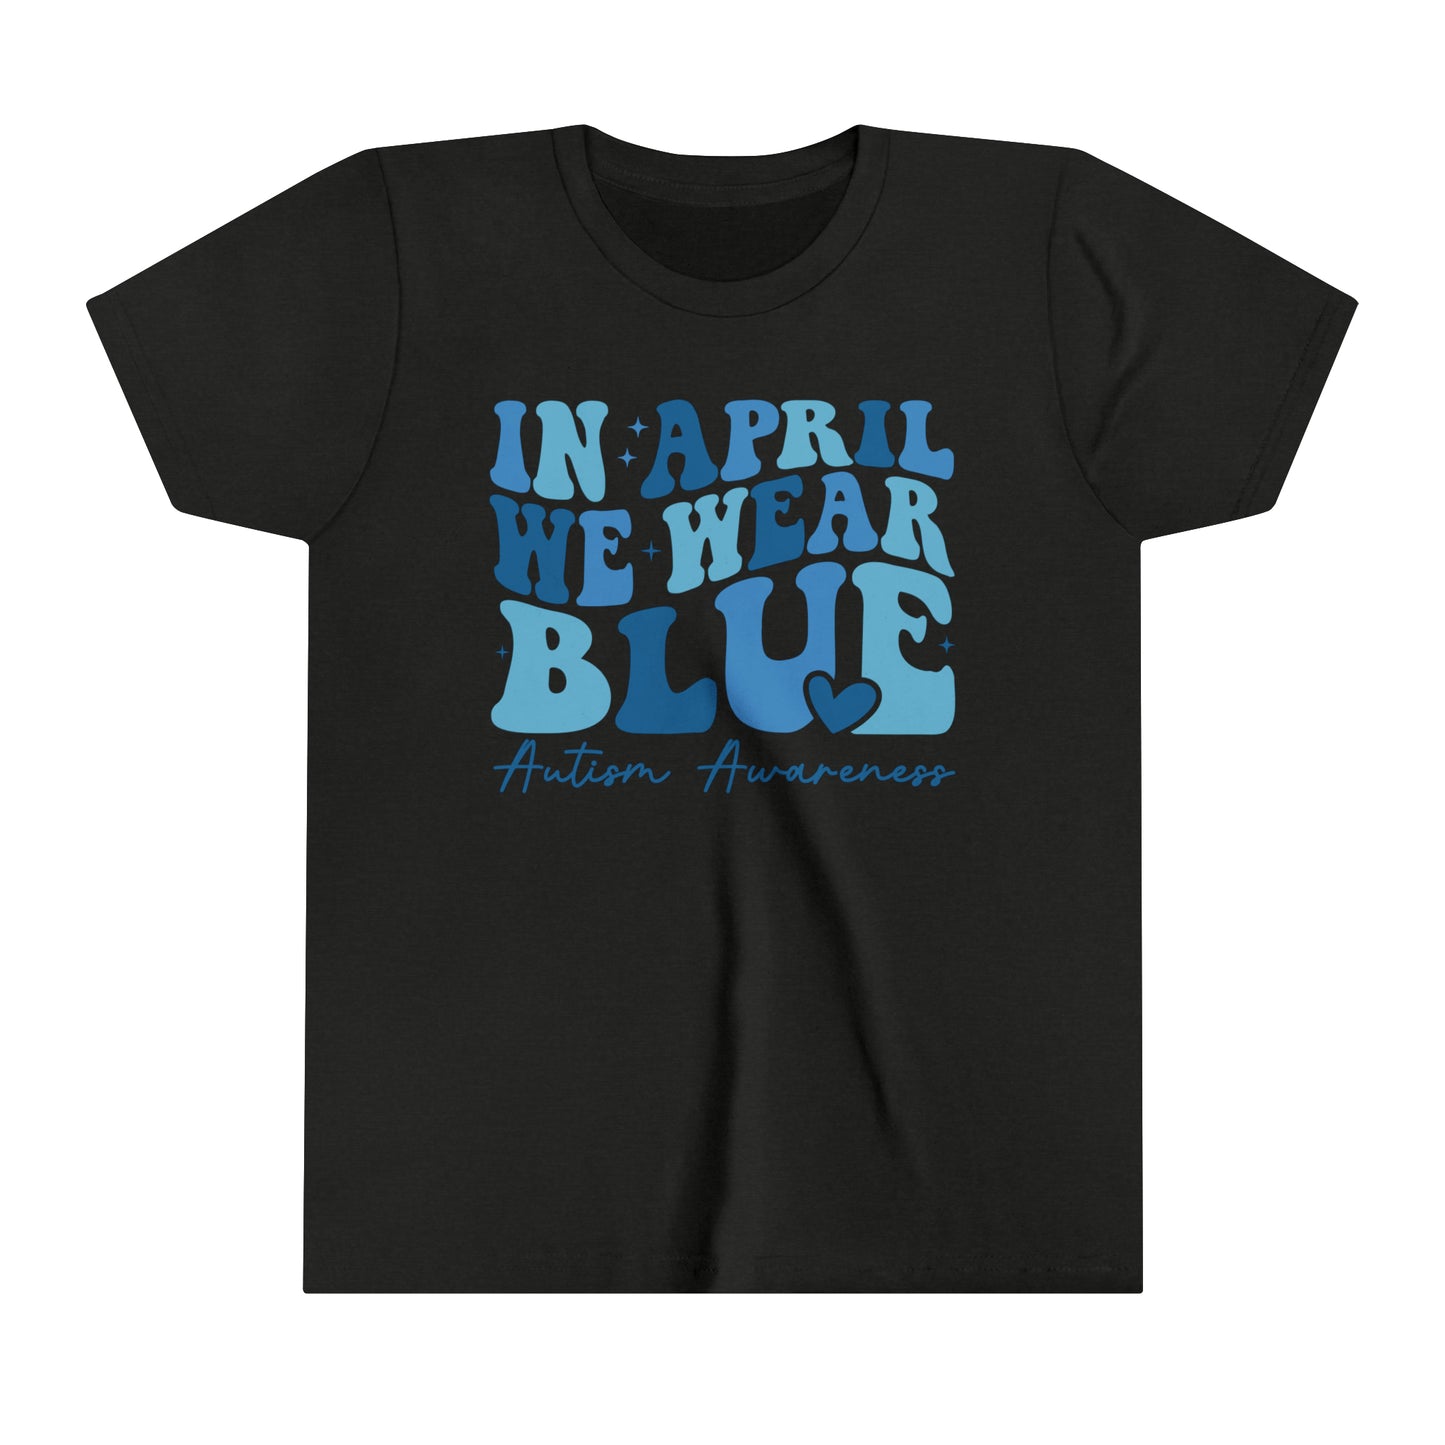 In April We Wear Blue Autism Advocate Awareness Youth Shirt